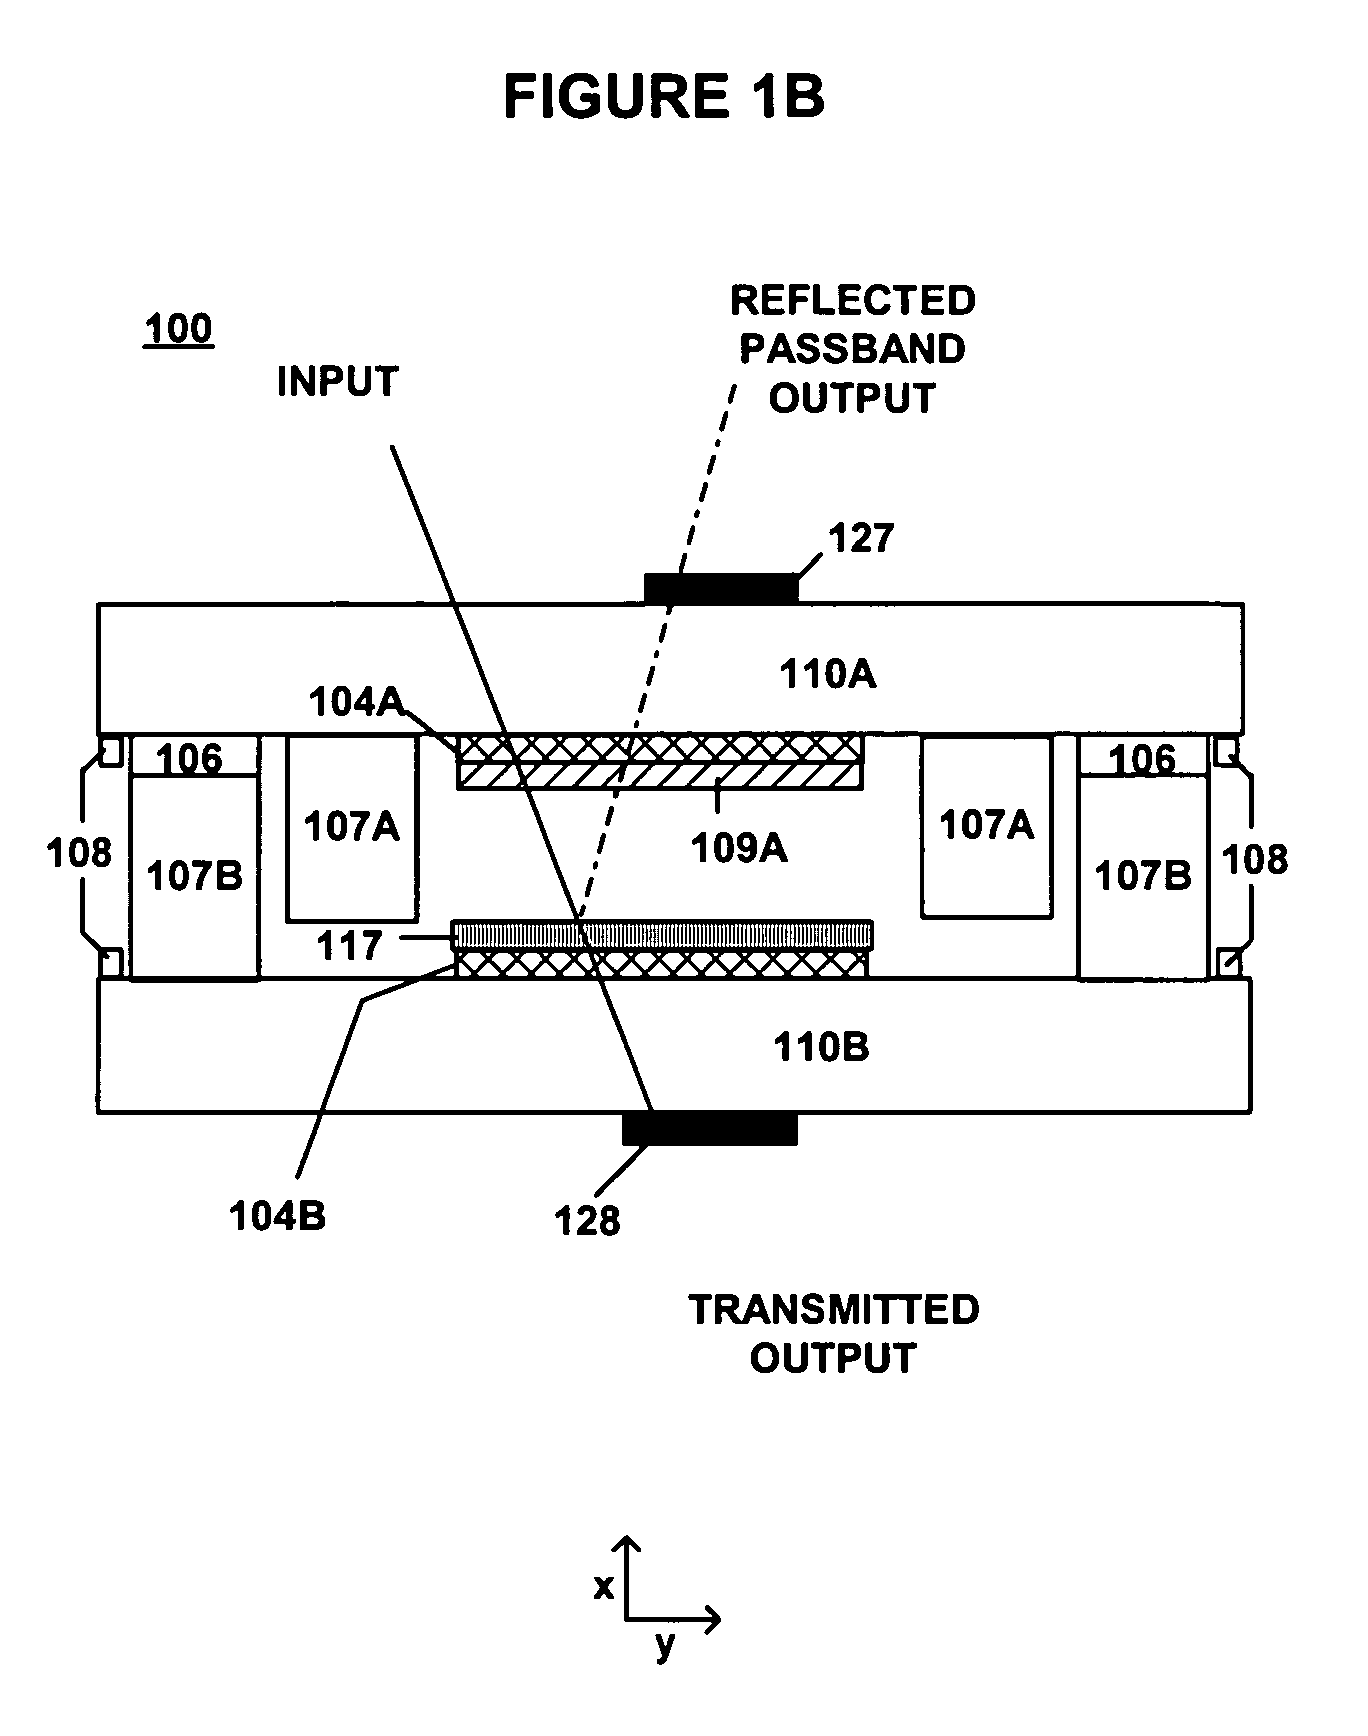 Wavelength locker with liquid crystal tunable filter generating transmitted and reflected outputs